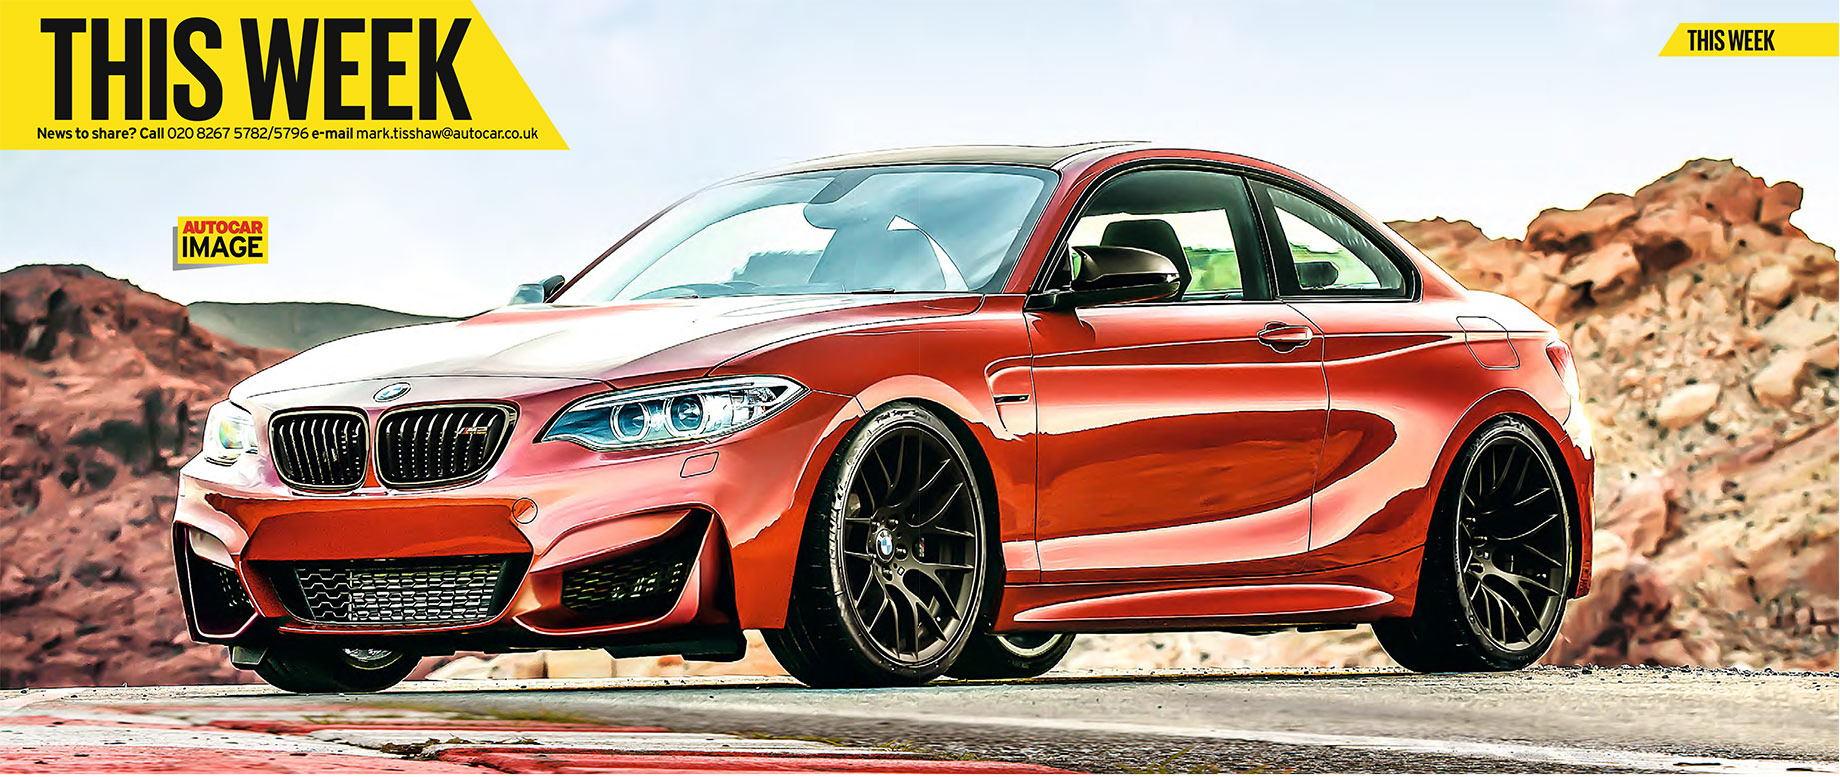 2016 BMW M2 Reportedly to Shed Some Weight, Will Be More Powerful than the 2-Series M235i